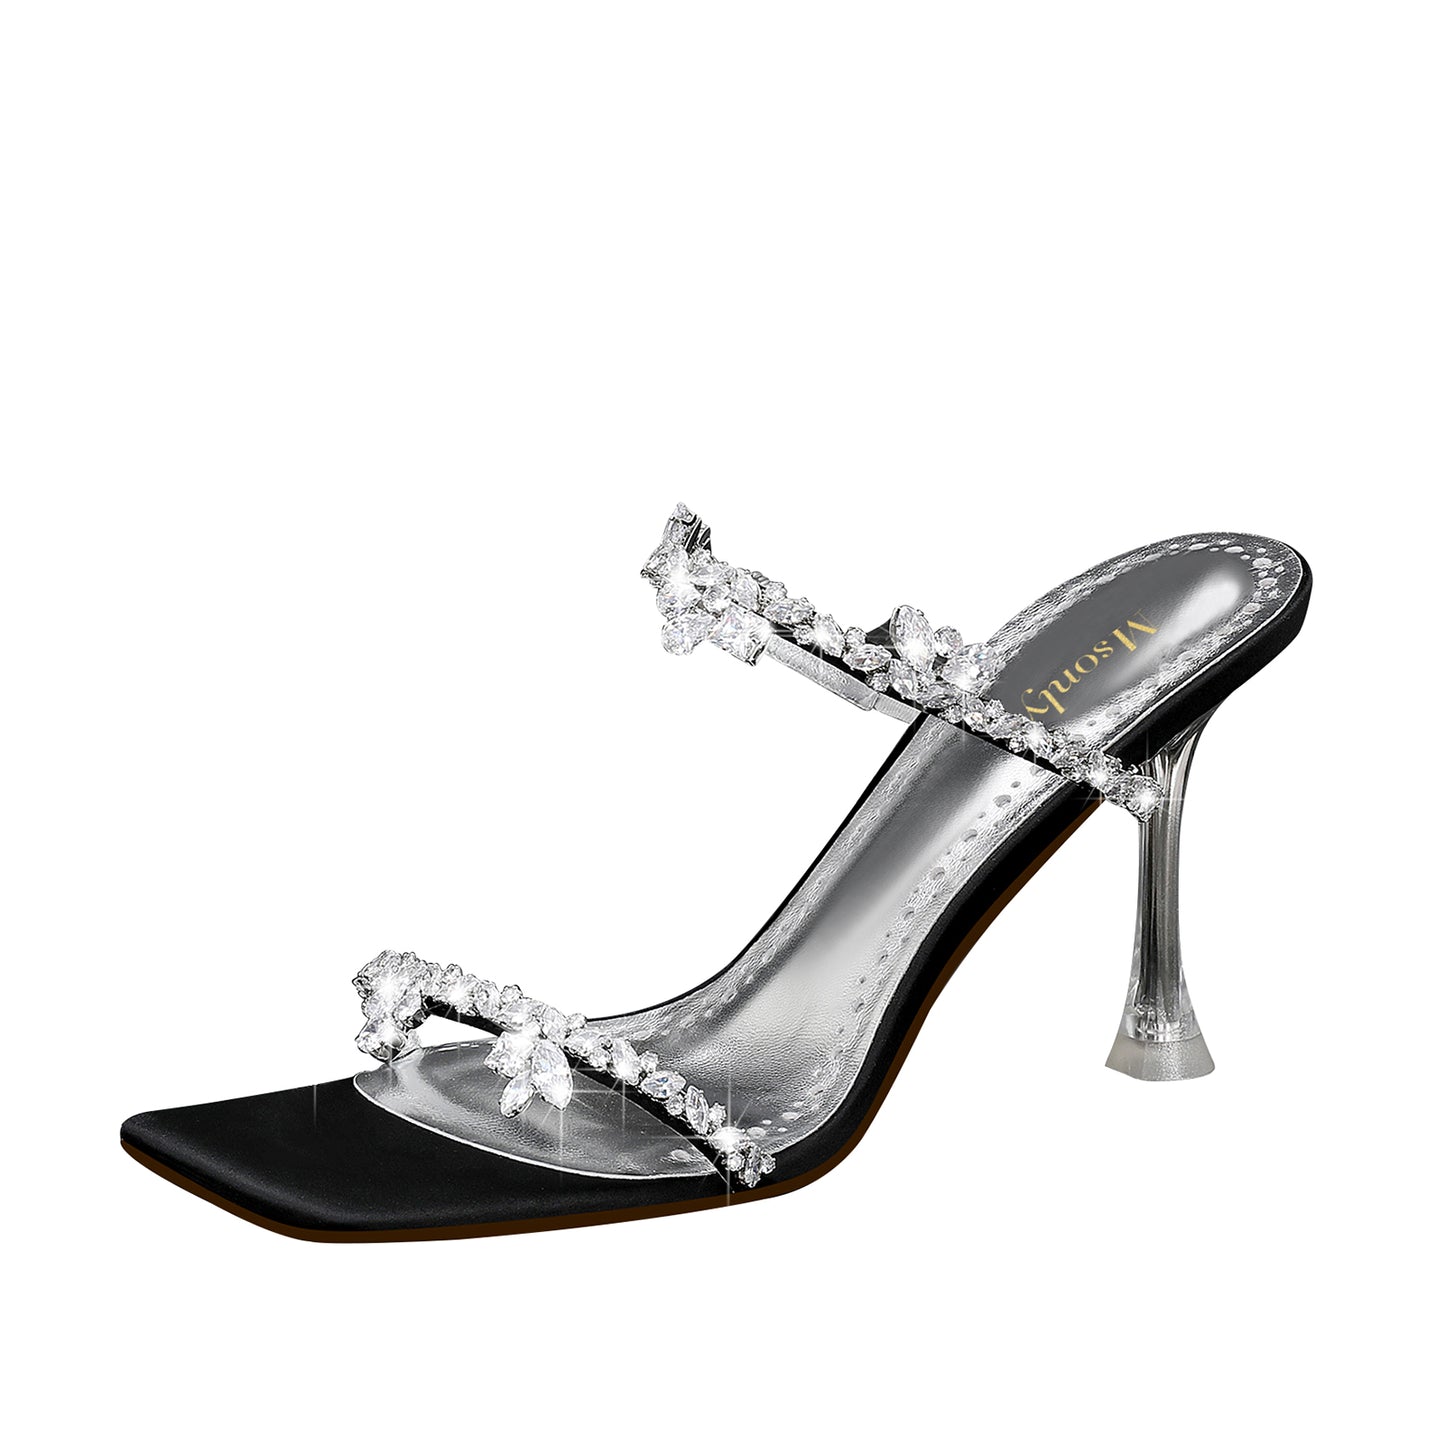 Women's Sexy Stiletto Open Toe Heeled Sandals with Soft Leather Strap and Square Mules